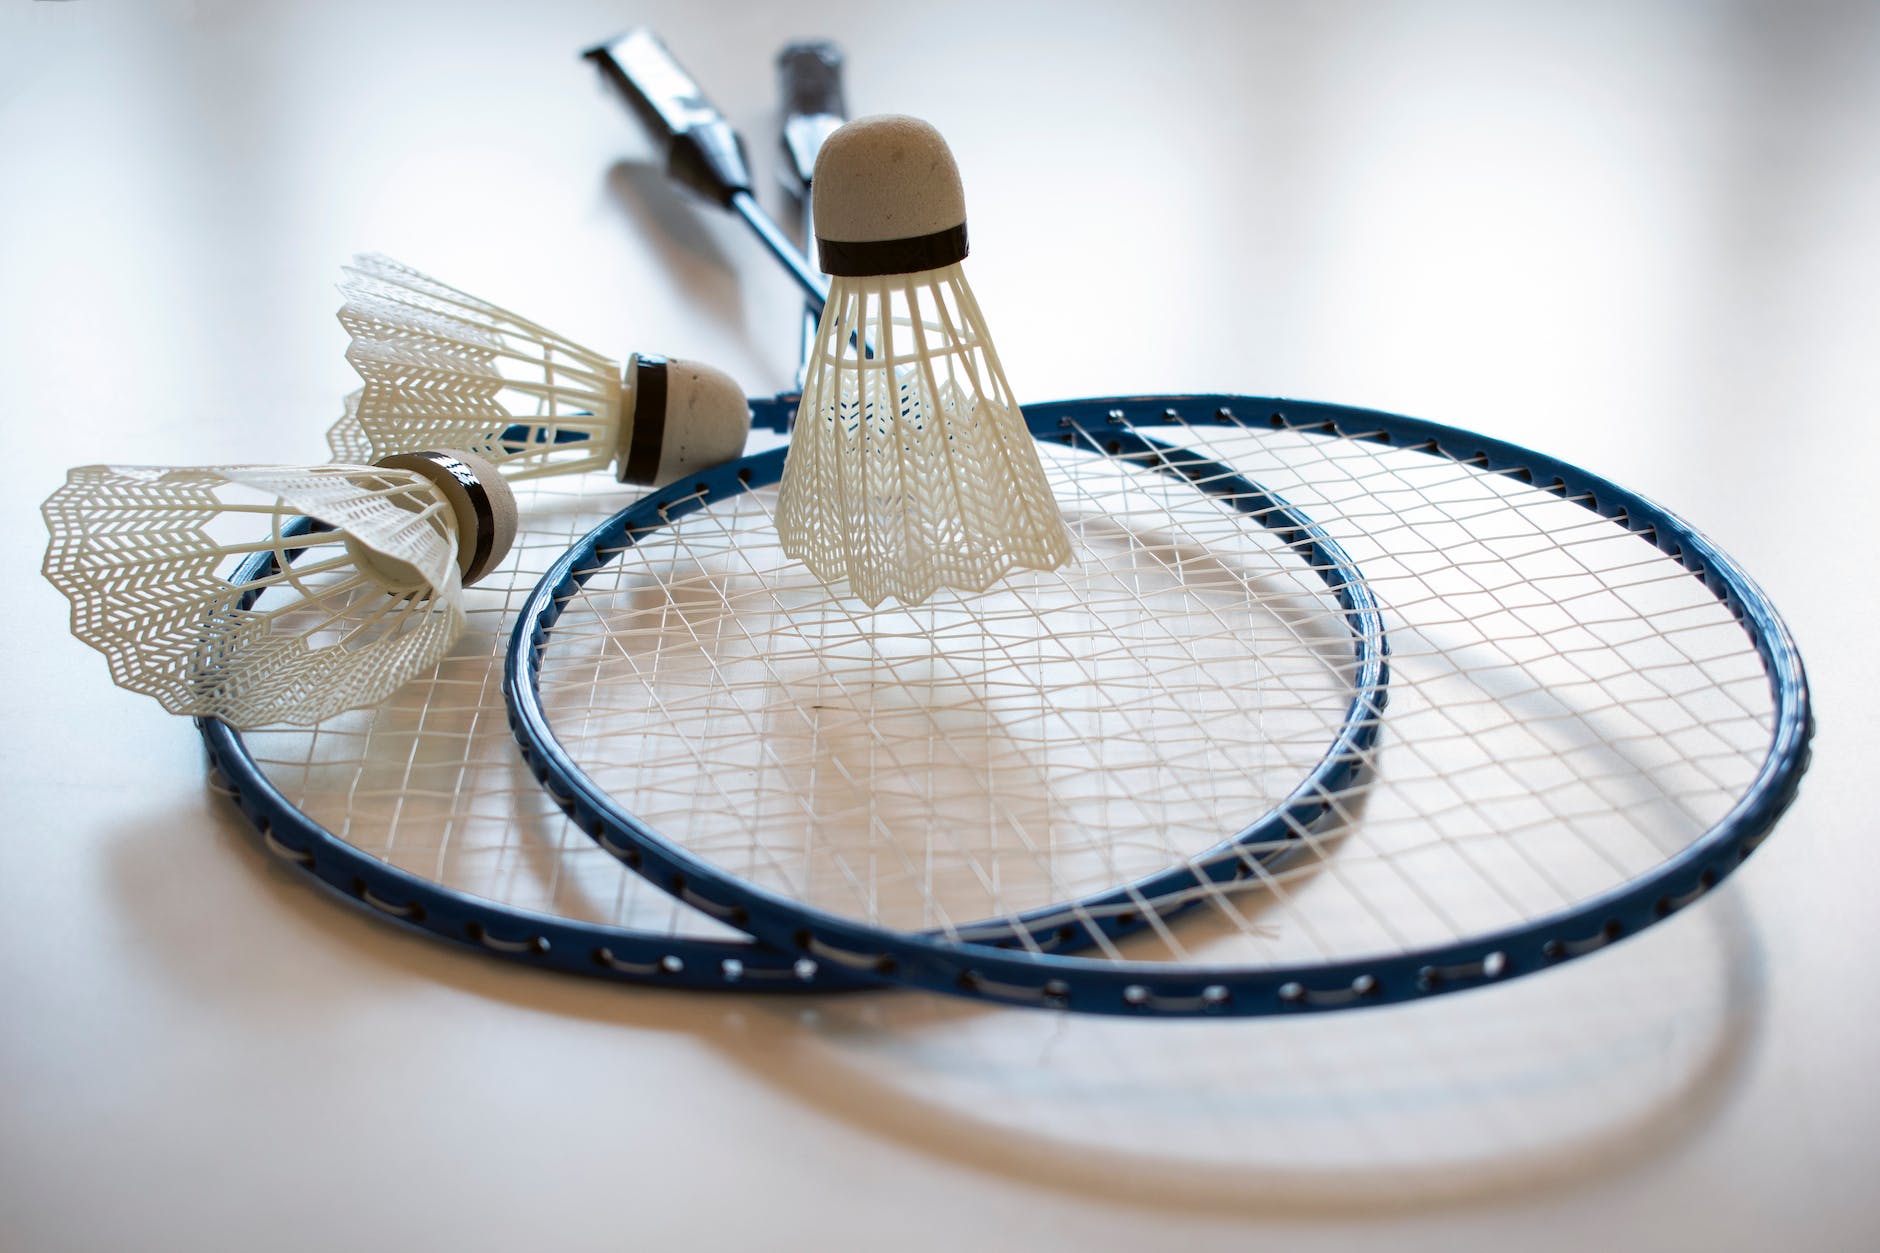 close up photo of badminton rackets and shuttlecock